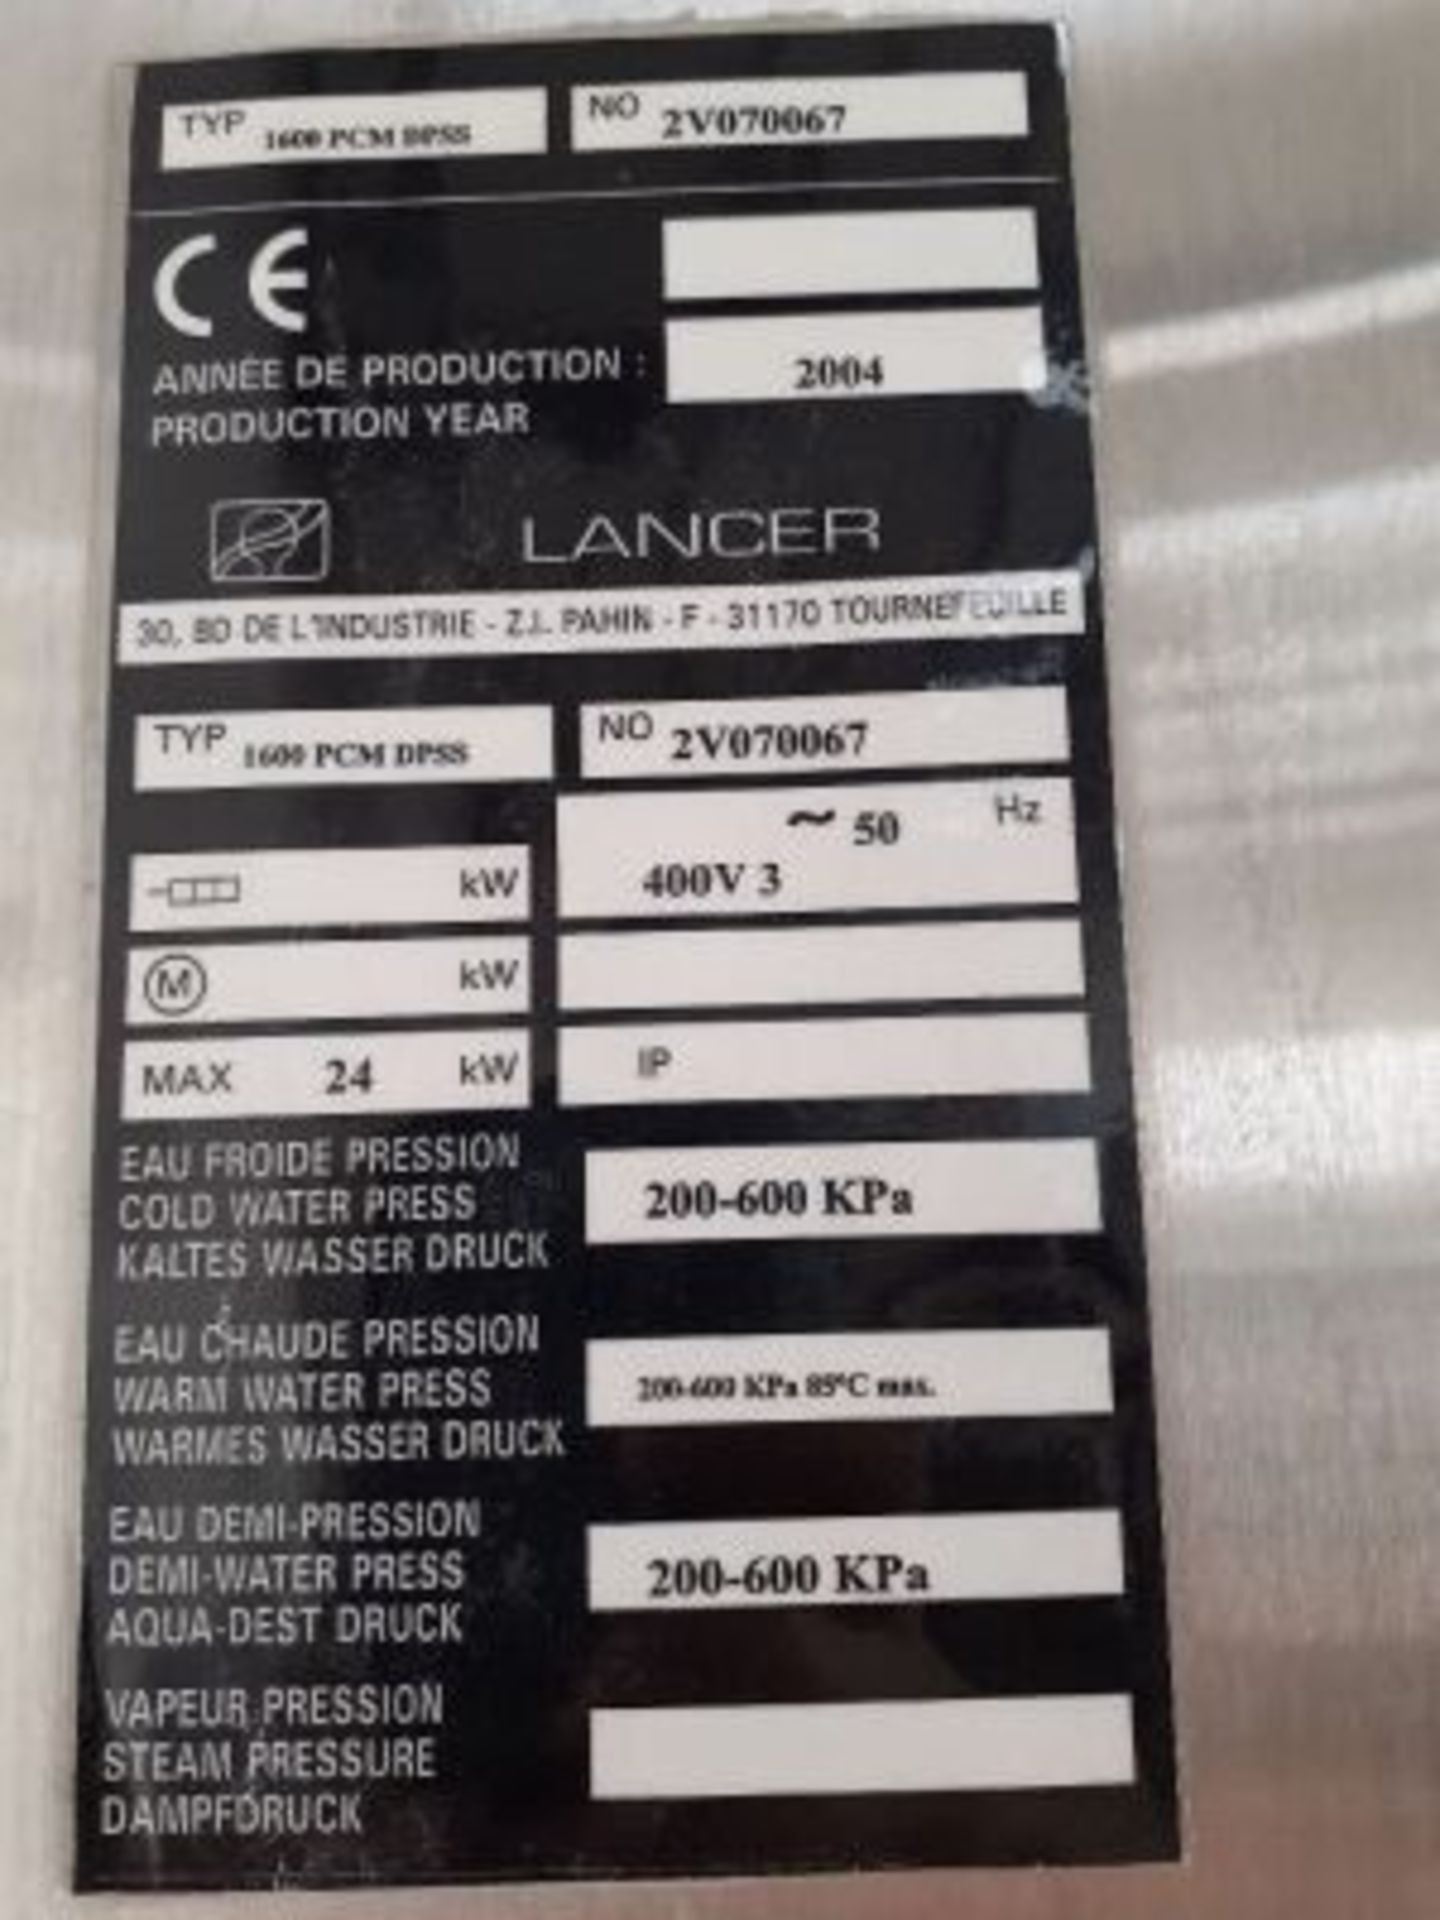 Lancer Washer infeed Type 1600 PCM DPSS, Year 2004, S/N:2V070067. 200-600 KPa - Image 12 of 12